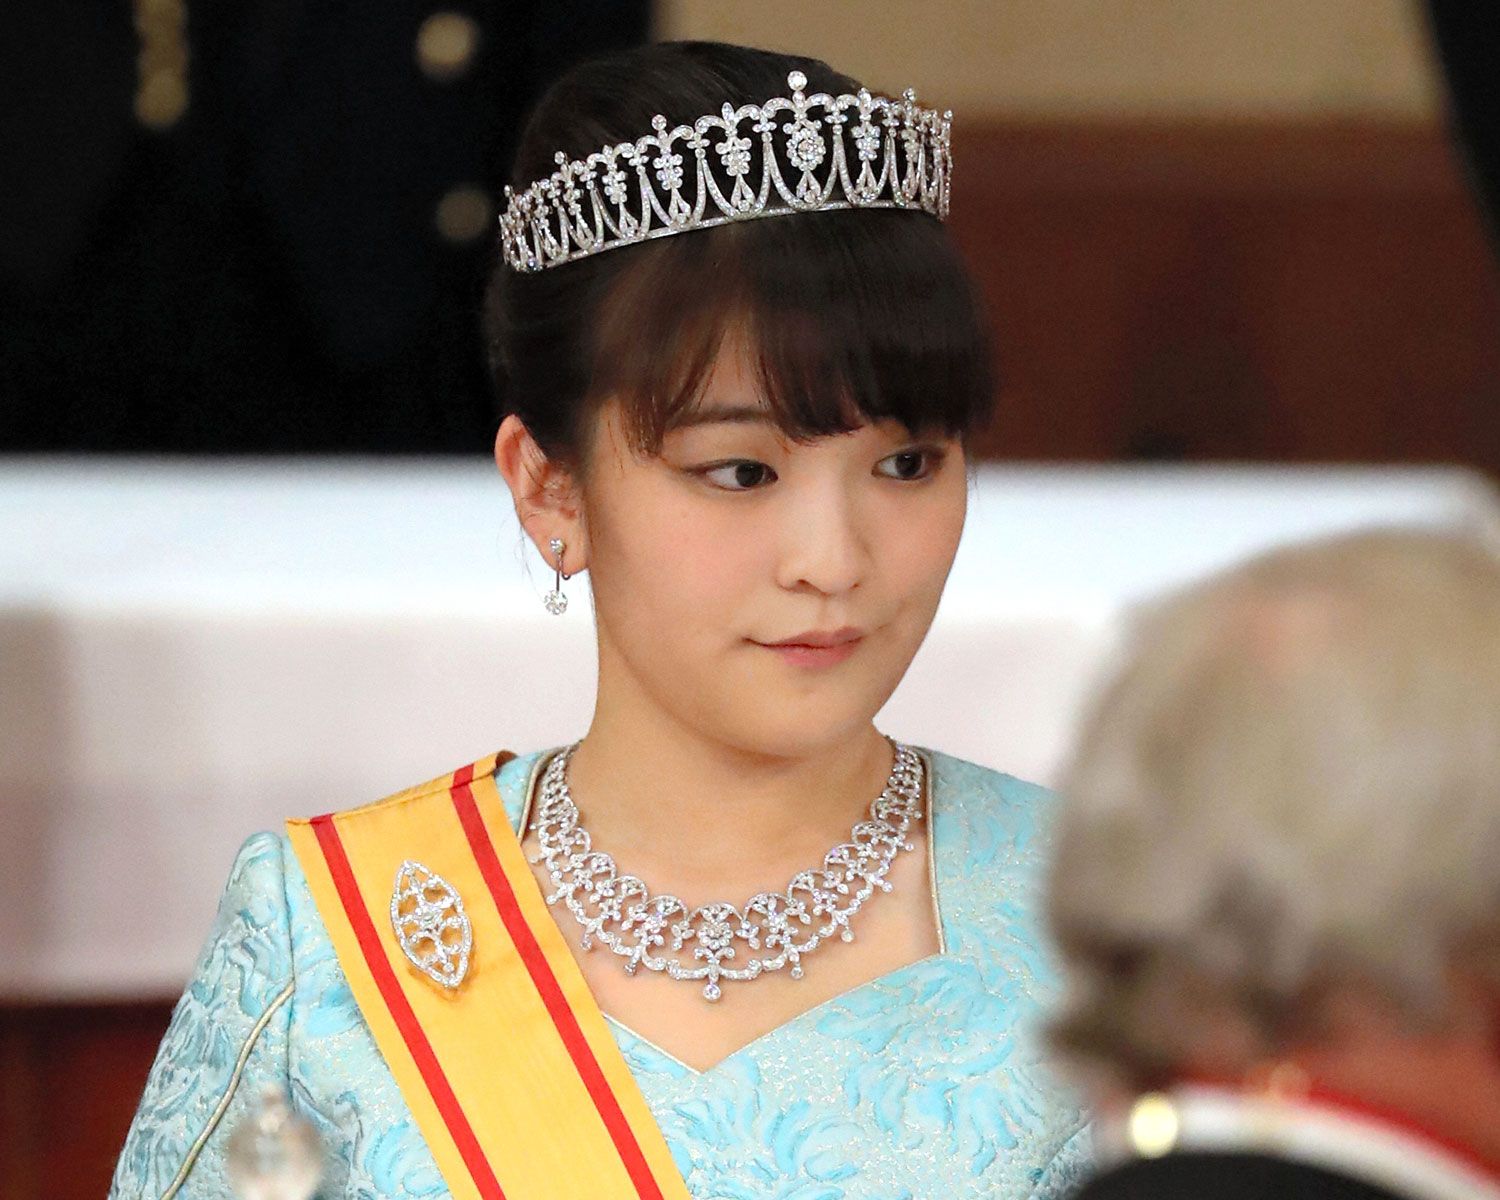 Japan's Princess Mako is set to forego a one-off million-dollar